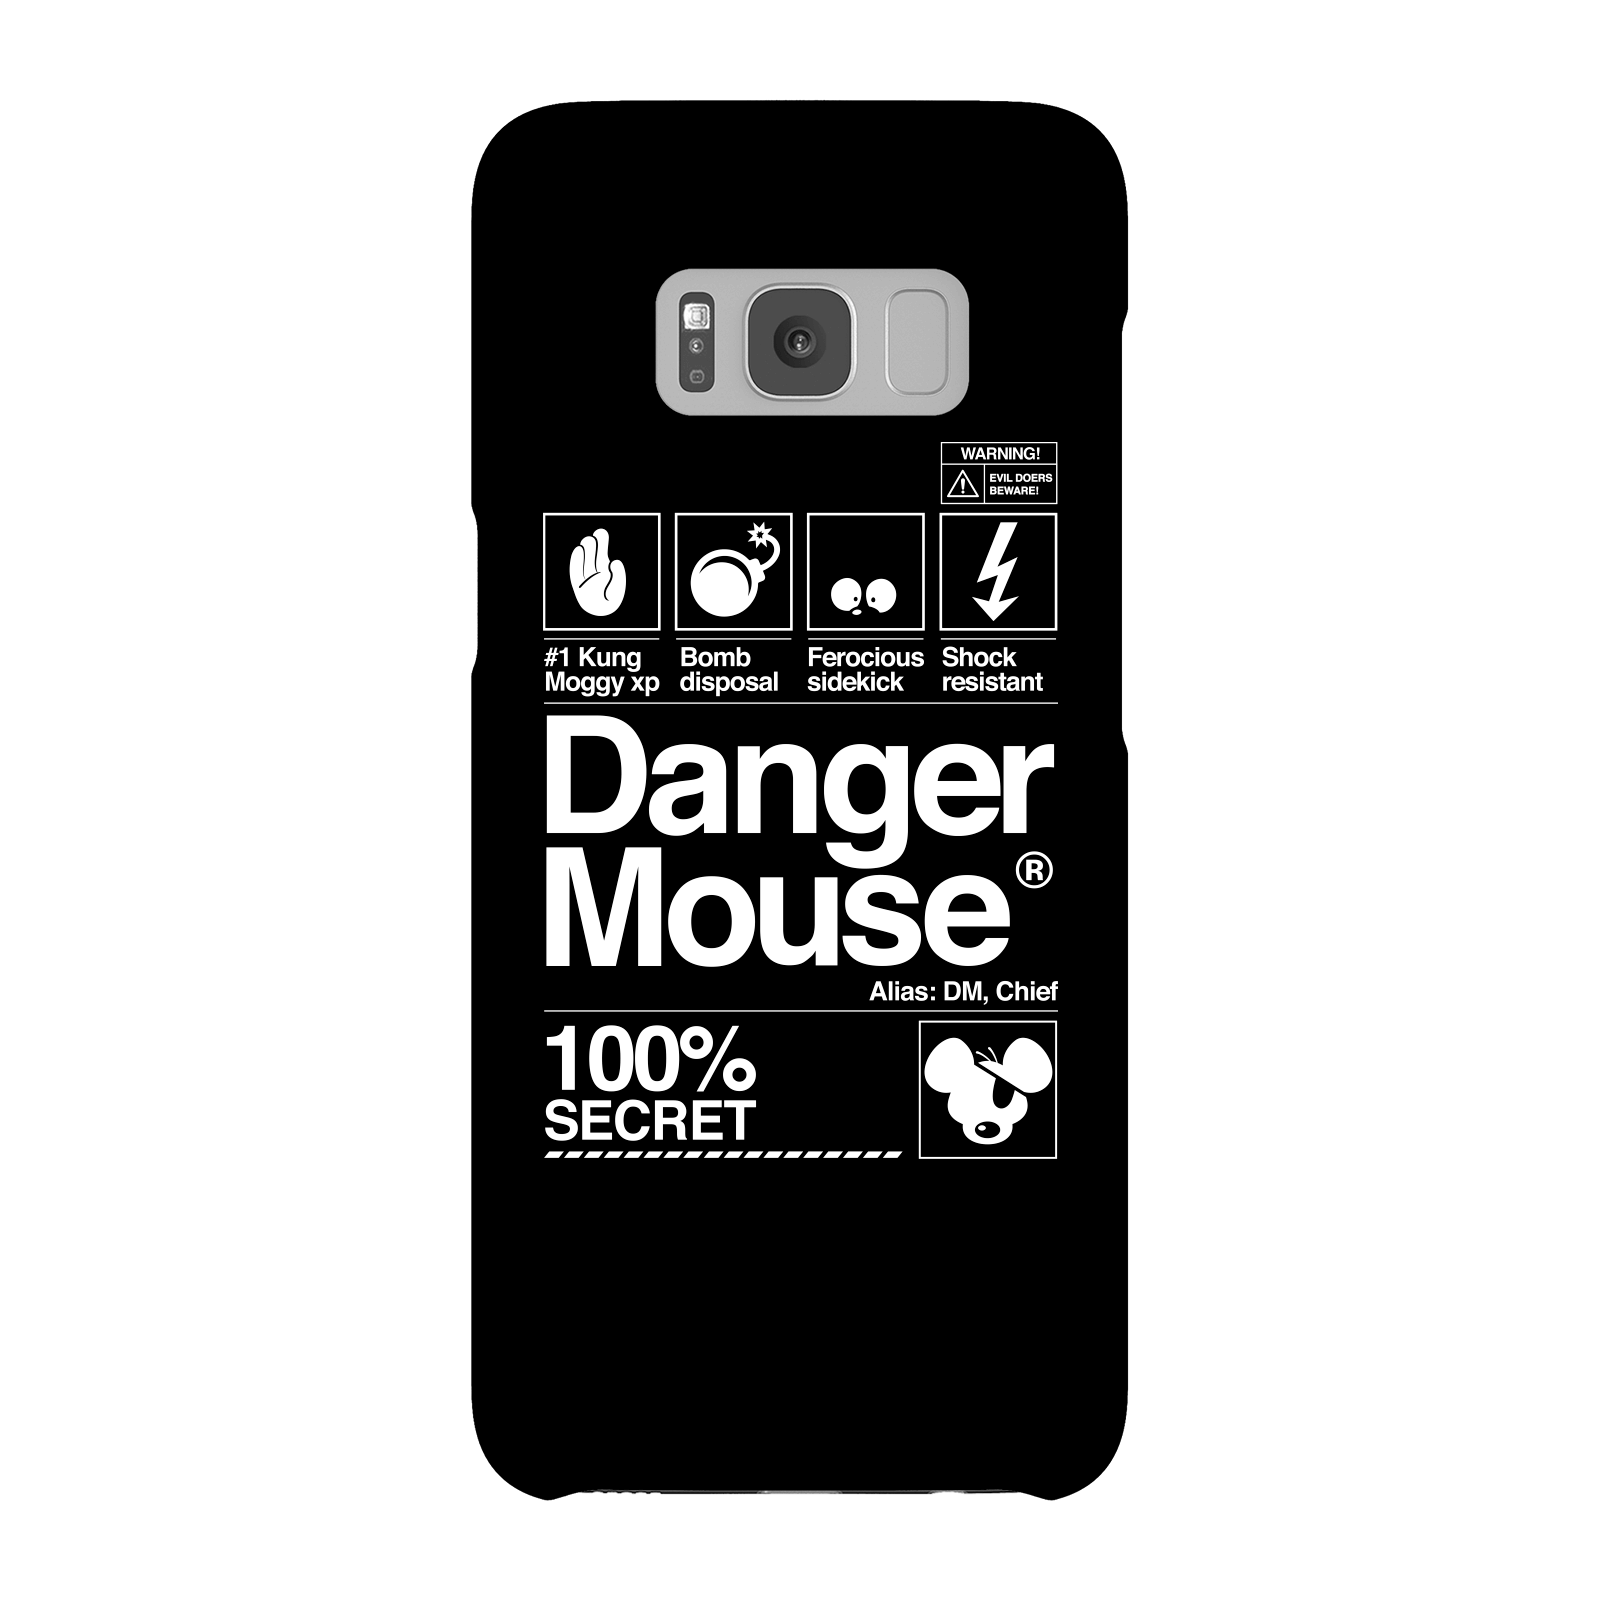 Danger Mouse 100% Secret Phone Case for iPhone and Android - Samsung S8 - Snap Case - Matte